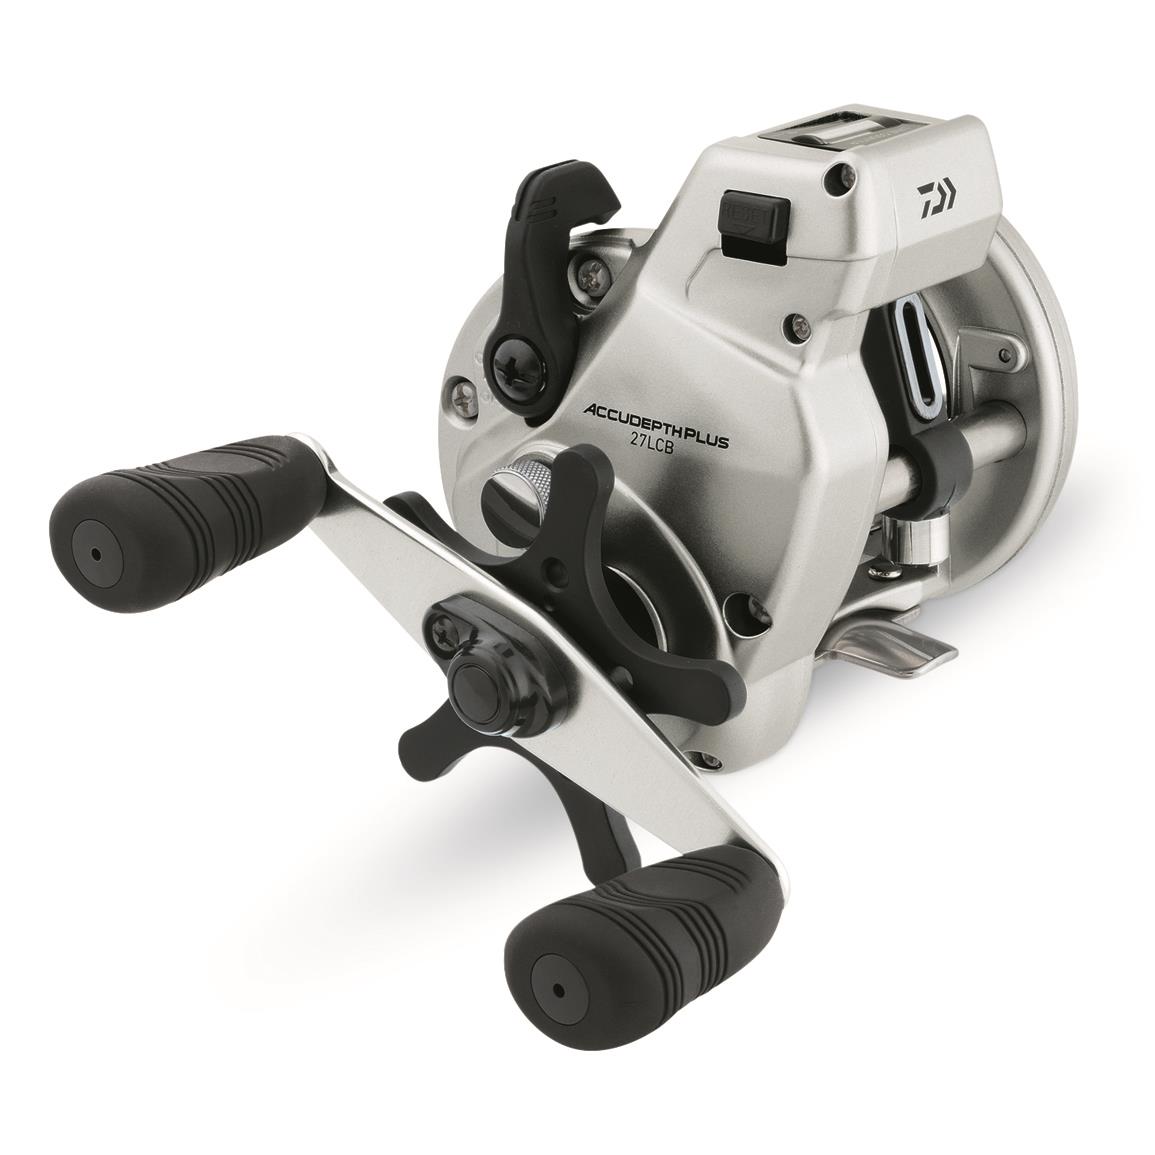 Daiwa Accudepth Plus B Line Counter Reel with Double Paddle Handle, 4.2:1 Gear Ratio, Right Hand